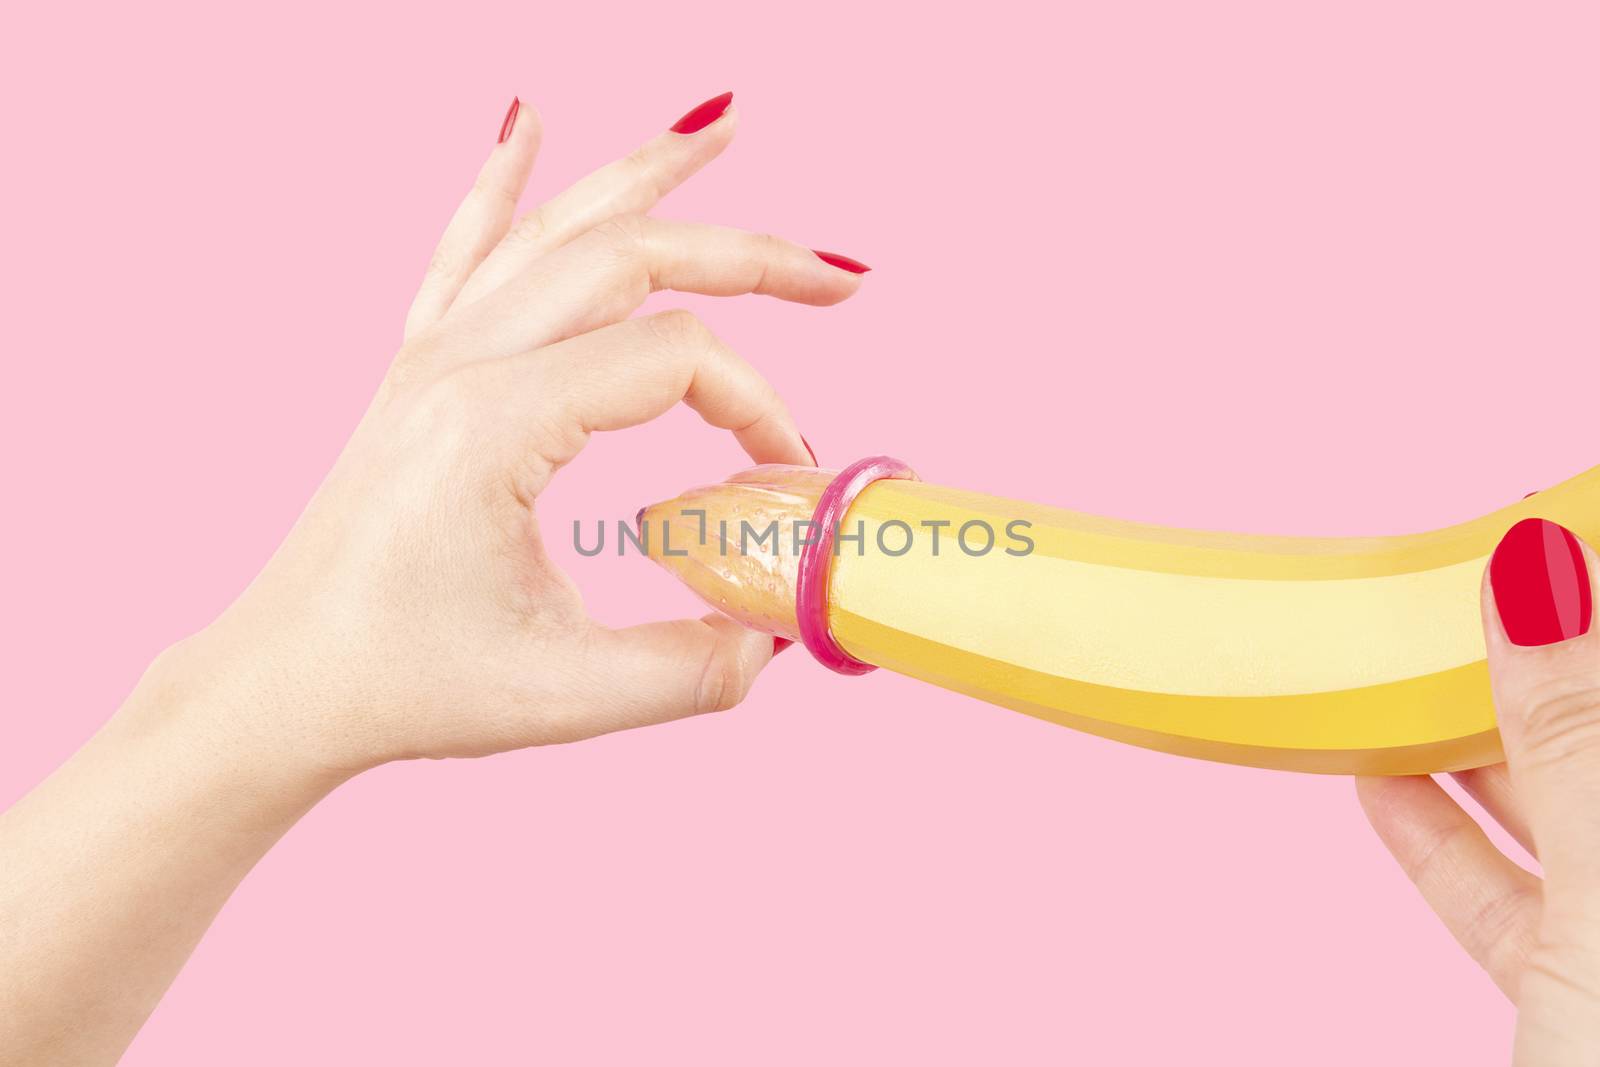 Female hand with red fingernails puts on a condom onto a banana. Safe sex concept.